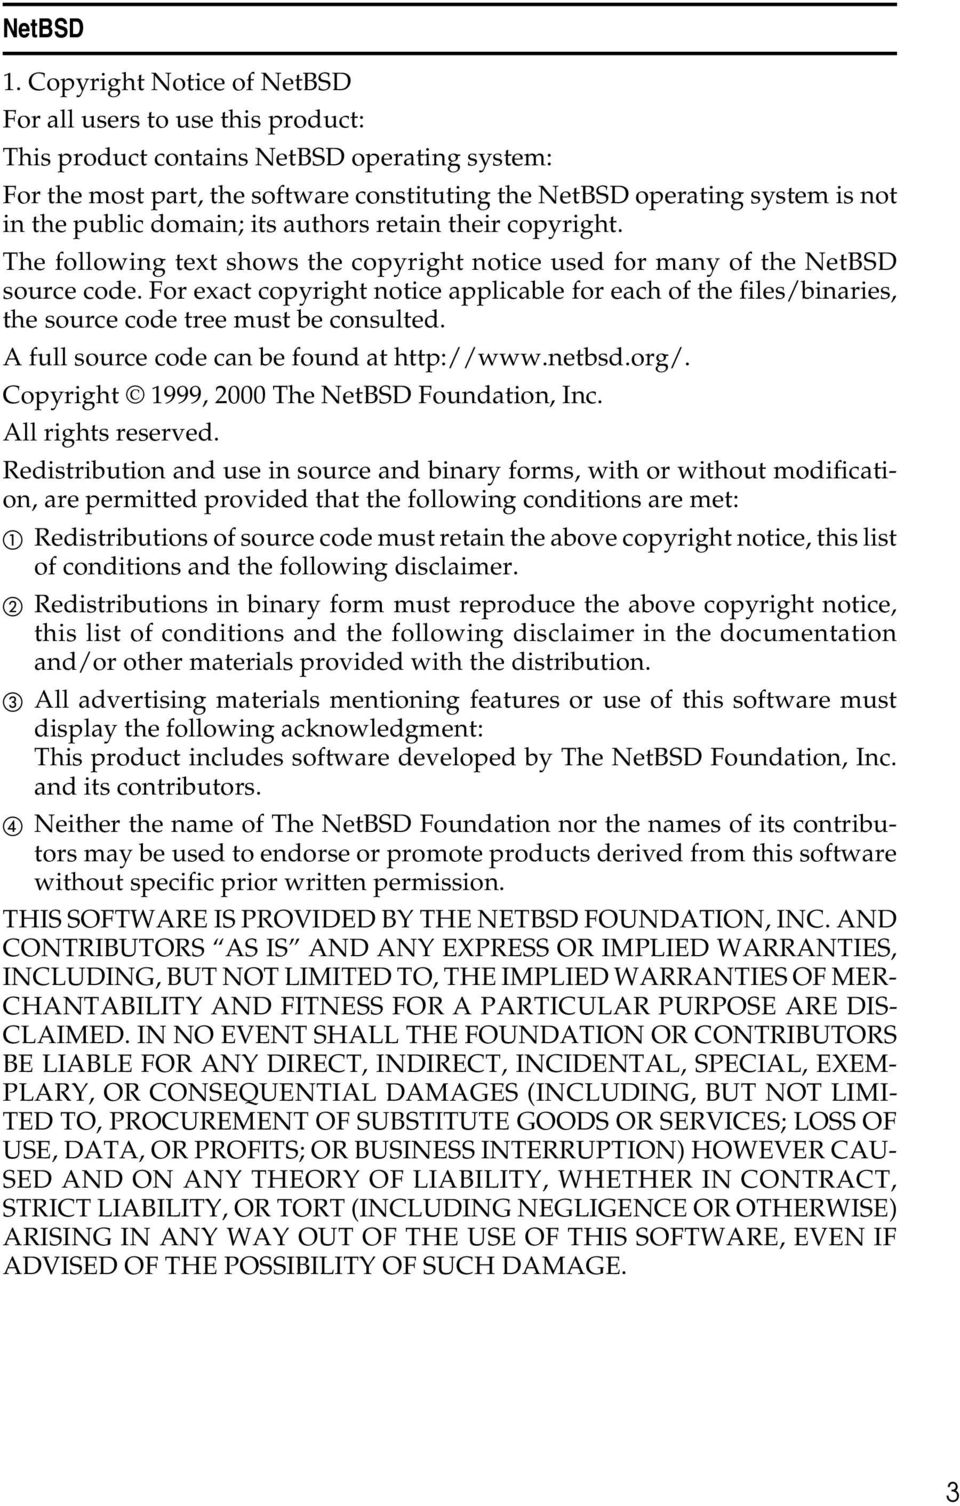 public domain; its authors retain their copyright. The following text shows the copyright notice used for many of the NetBSD source code.